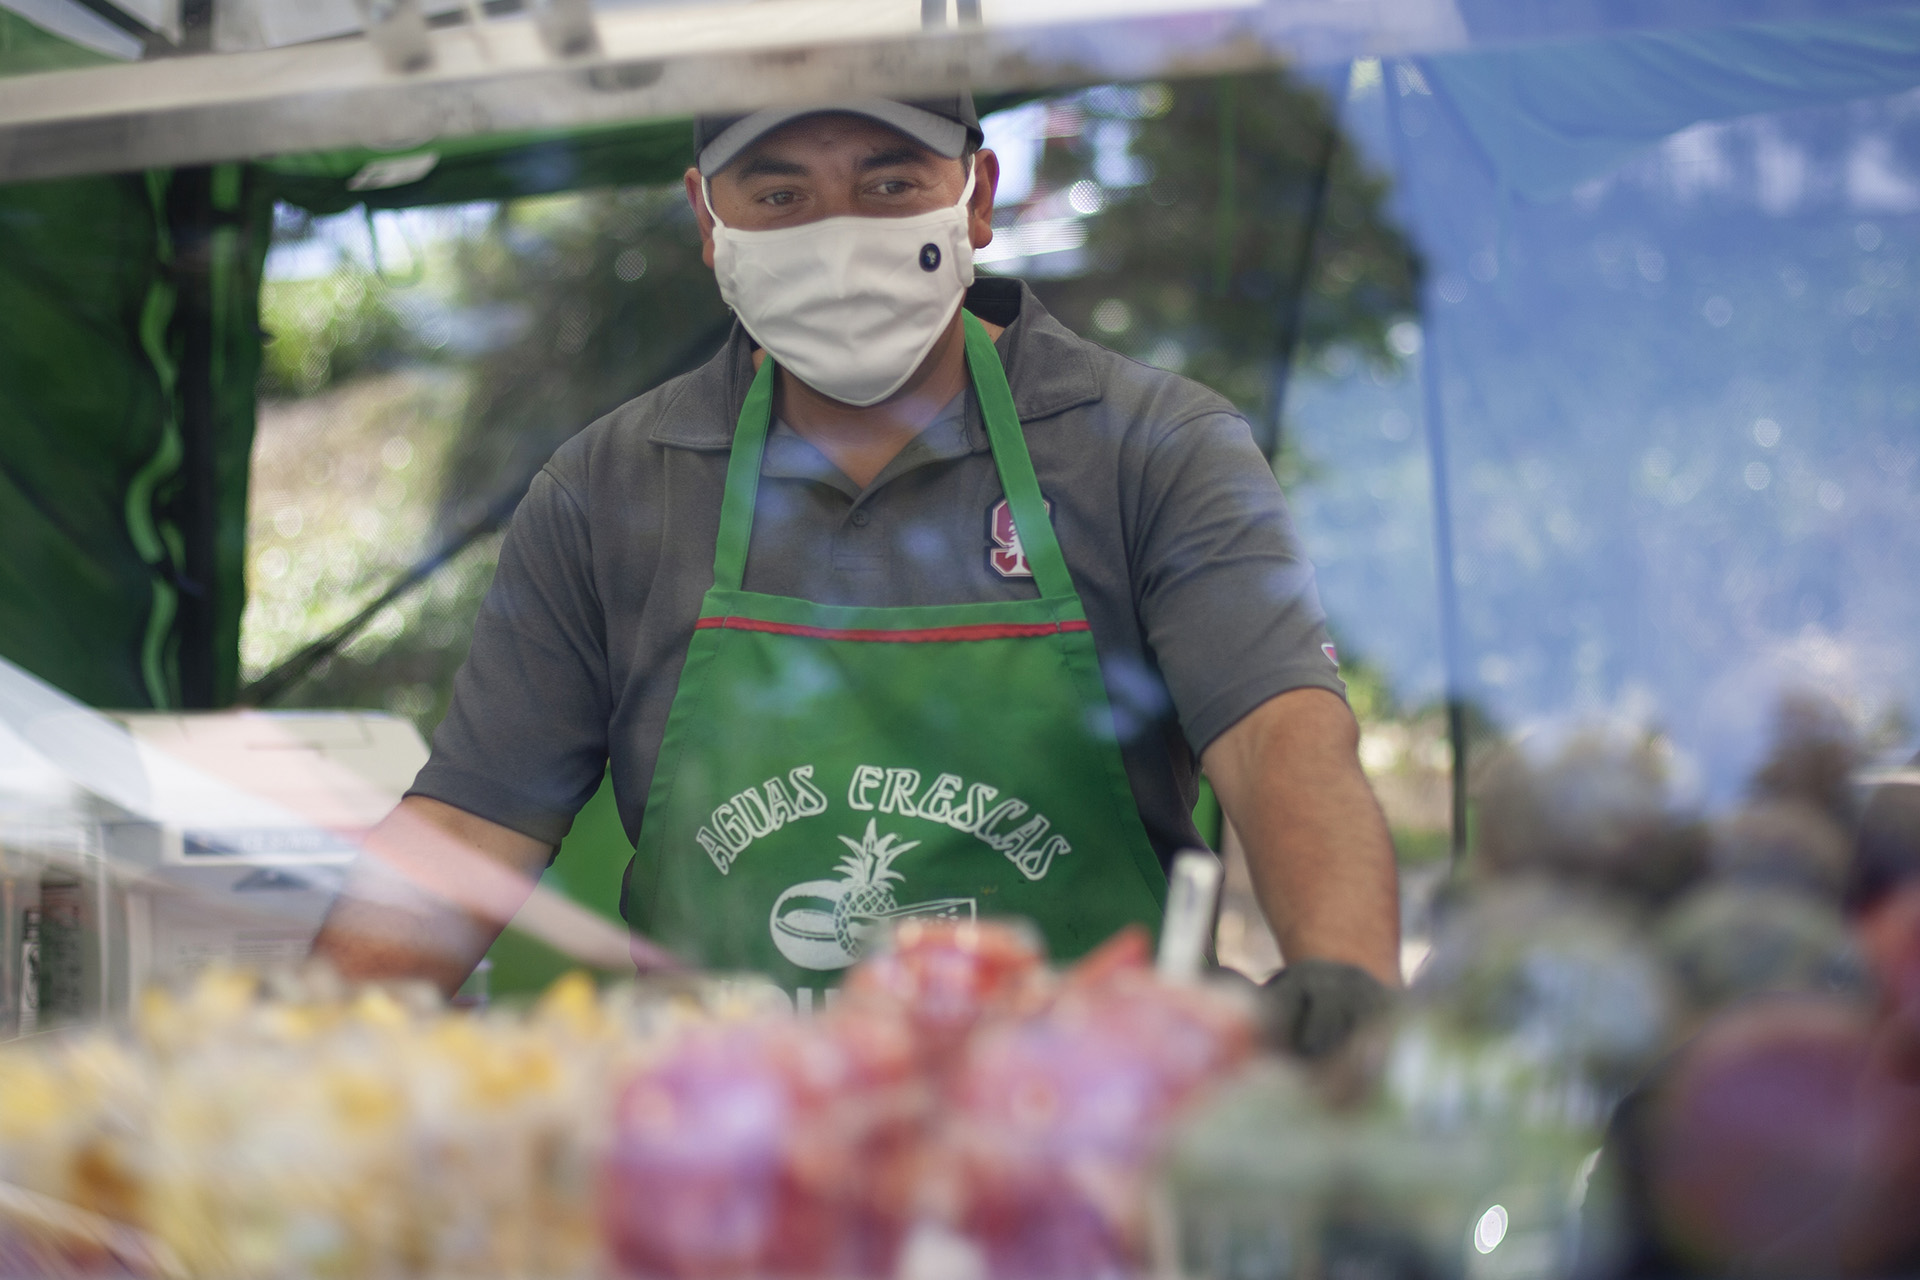 Jose Barajas works at his fresh fruit juice and smoothie stand at El Mercado farmer's market in Watsonville. Kaiser Permanente is a major sponsor of the market.